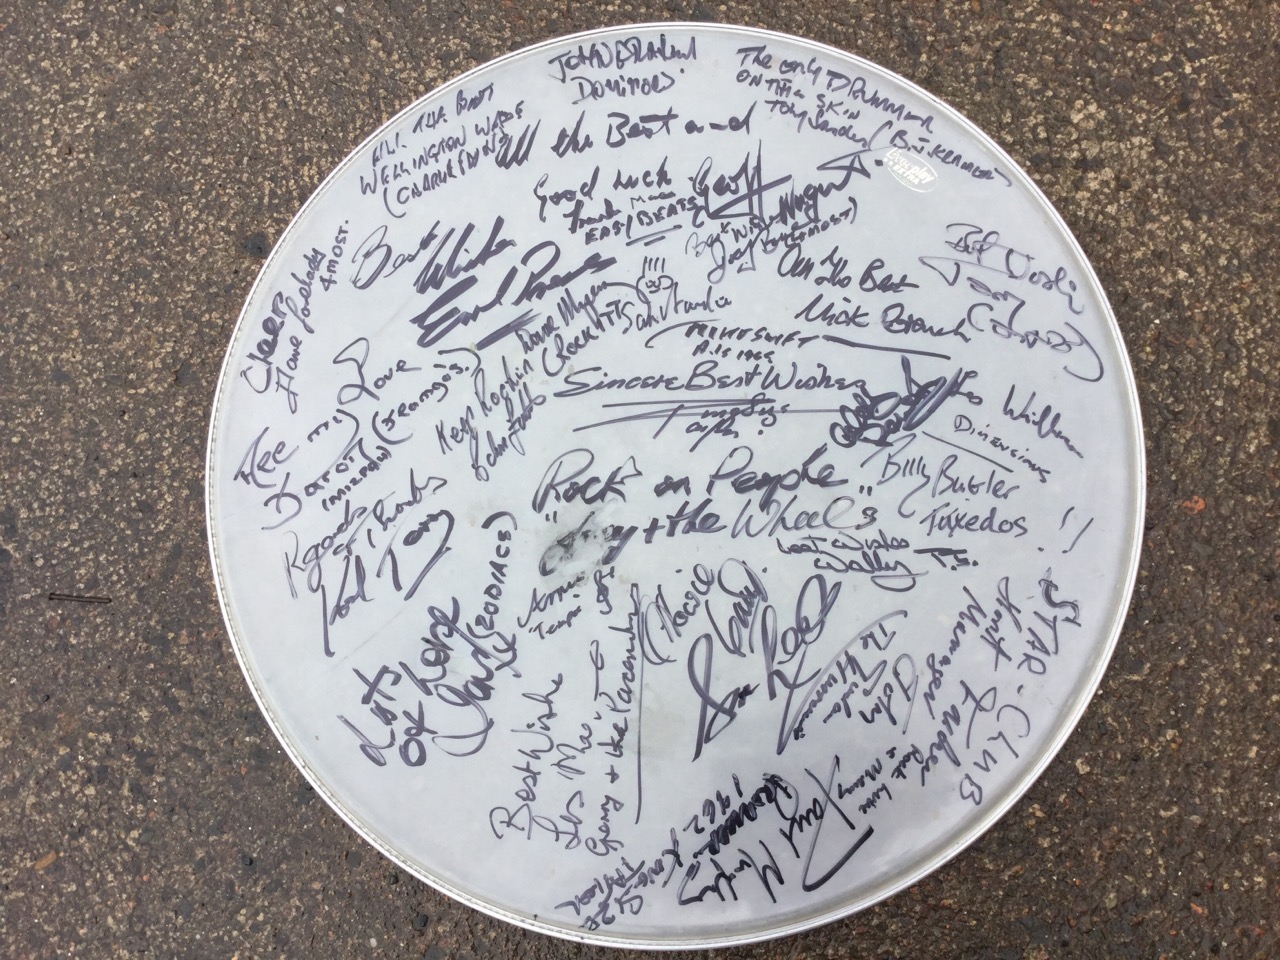 A 60s drum skin signed by the famous Star Club of Hamburg performers and promoters including Horst